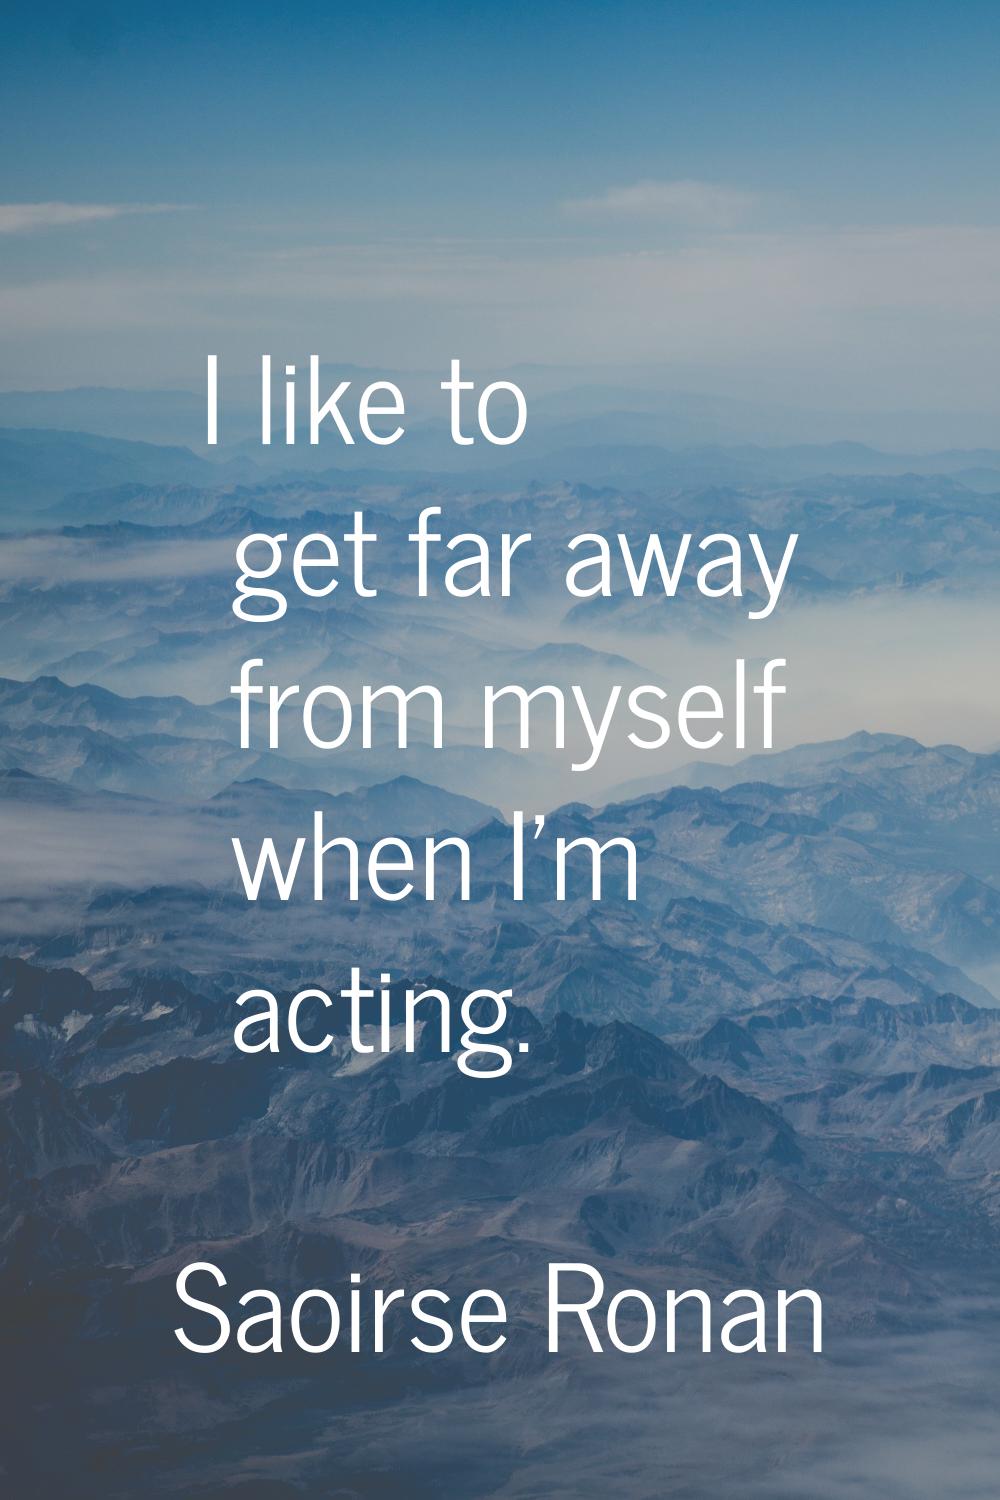 I like to get far away from myself when I'm acting.